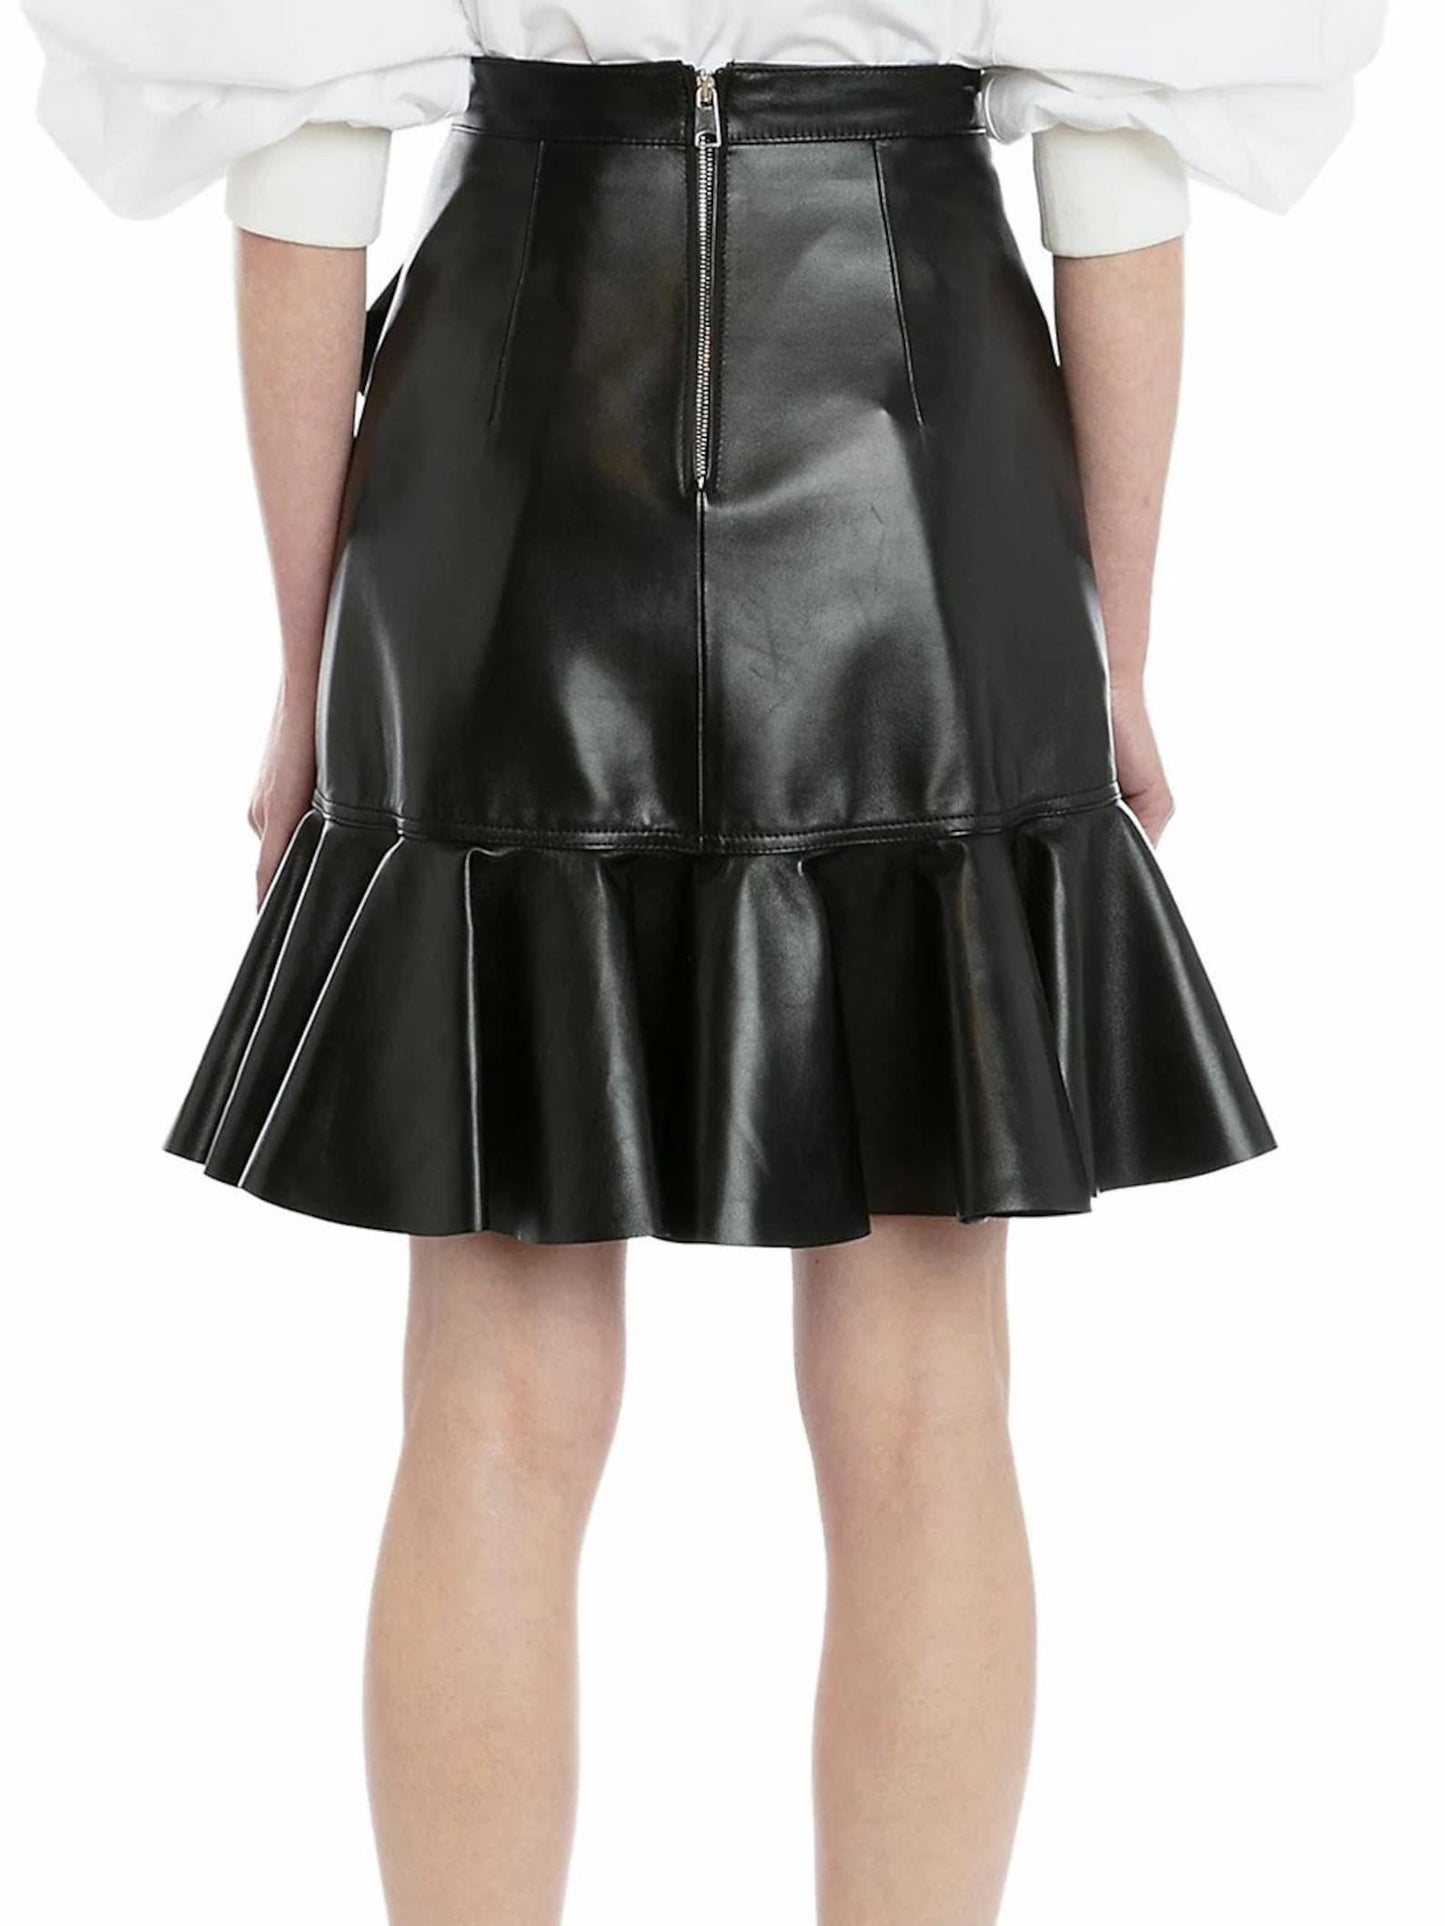 Handmade Genuine Leather Skirt Outfit